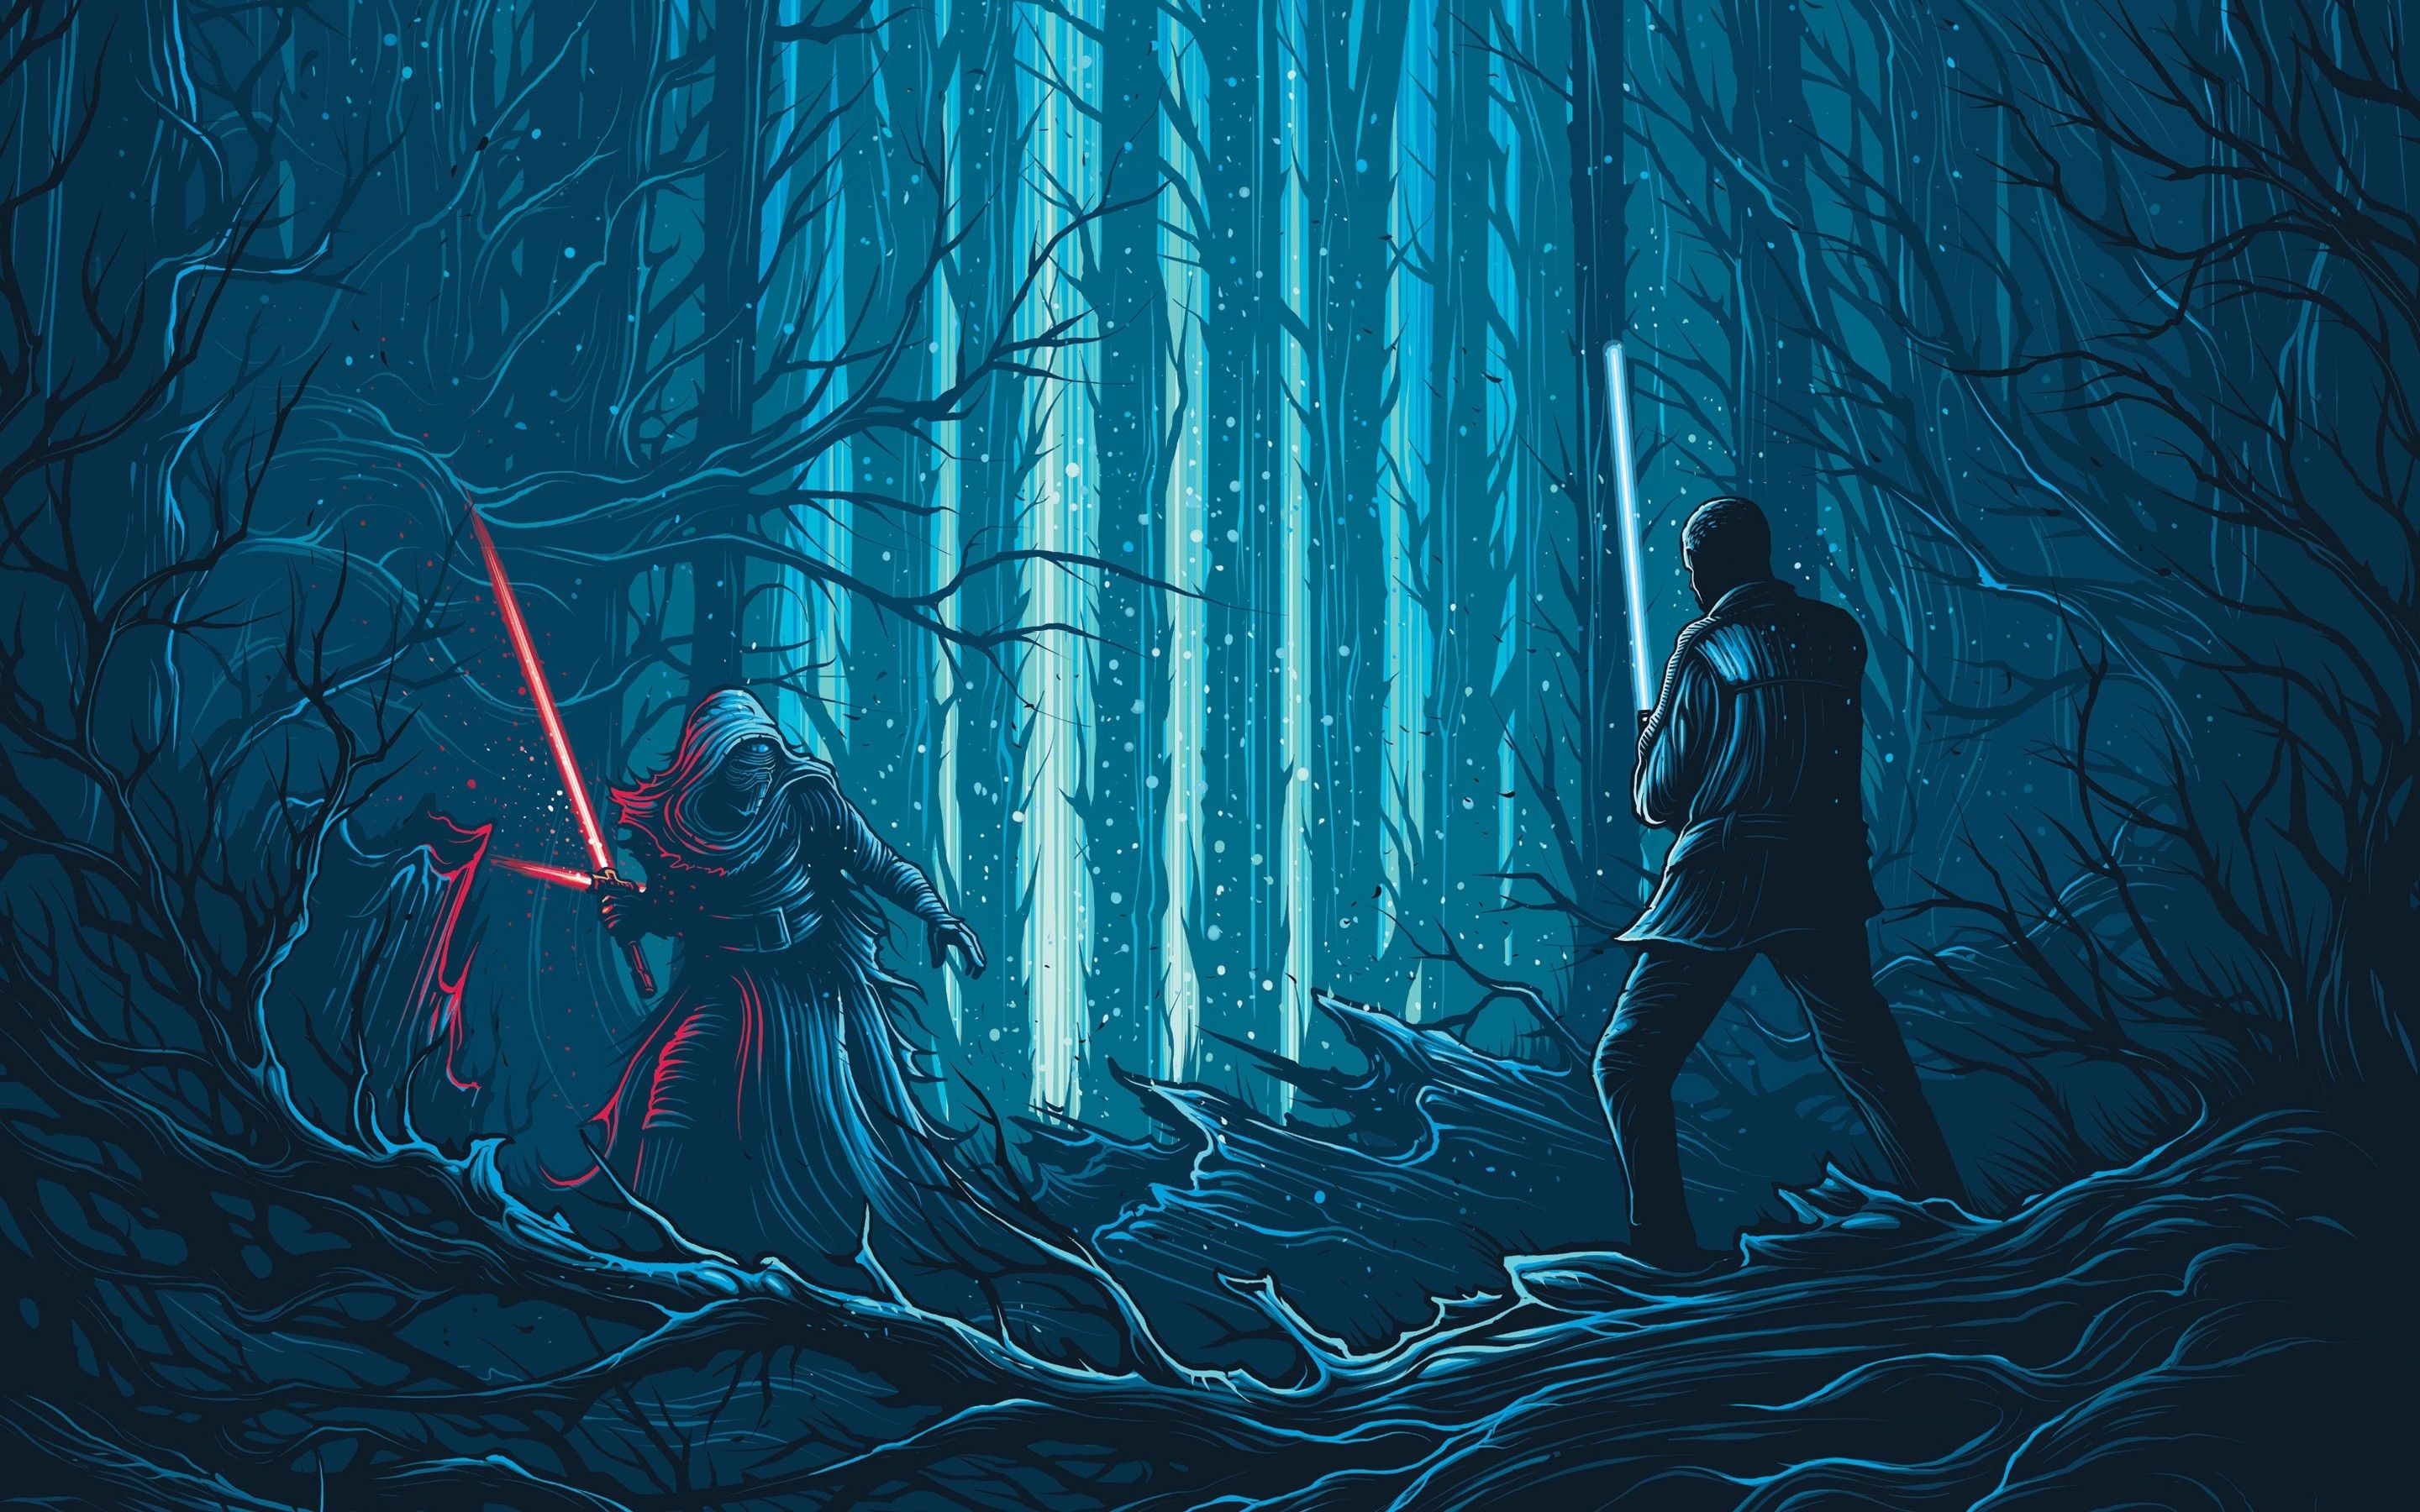 A poster of two people in the woods - Star Wars